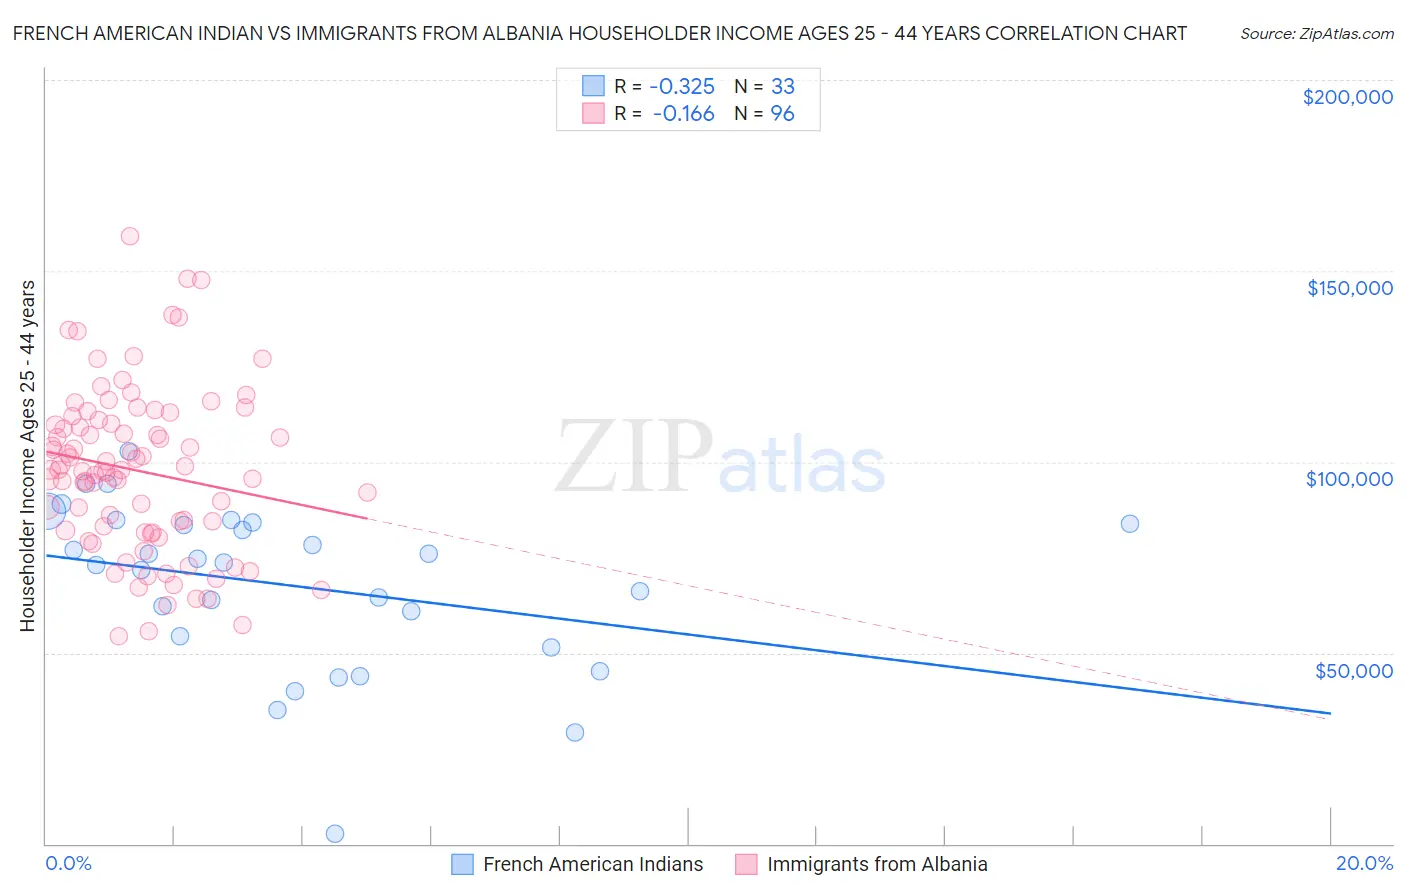 French American Indian vs Immigrants from Albania Householder Income Ages 25 - 44 years